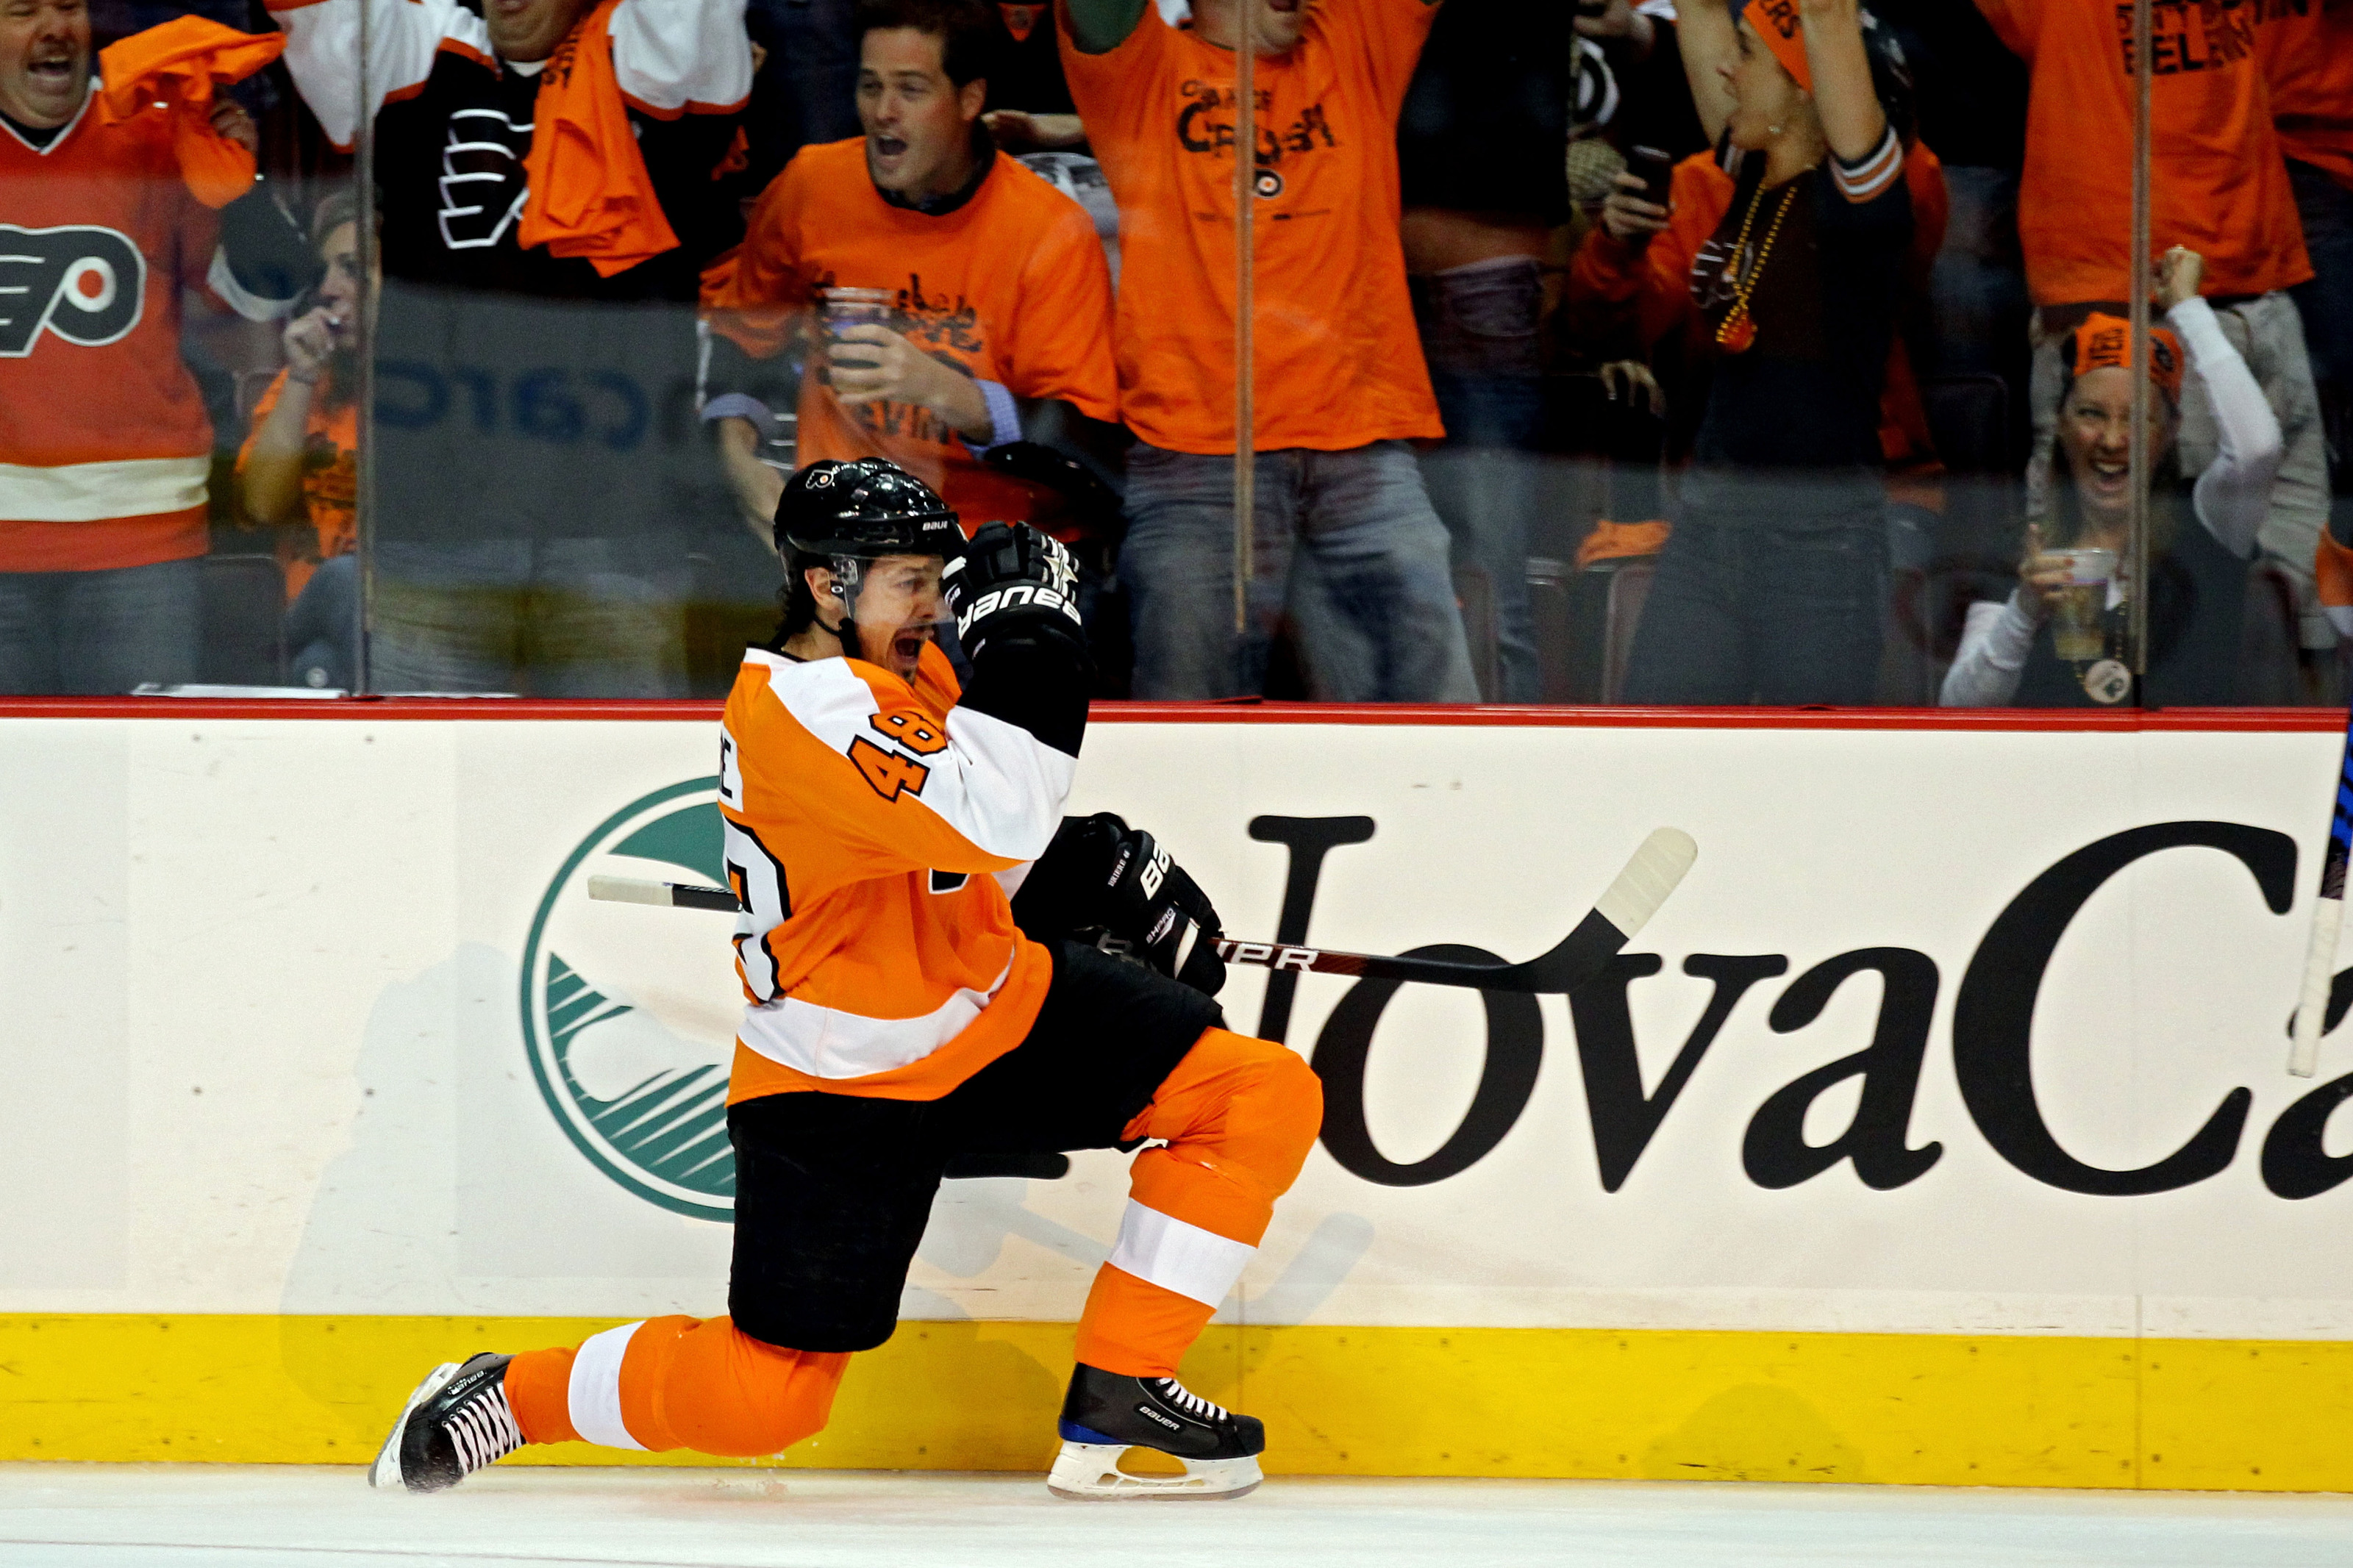 Danny Briere scores in OT to get the win for the Flyers.